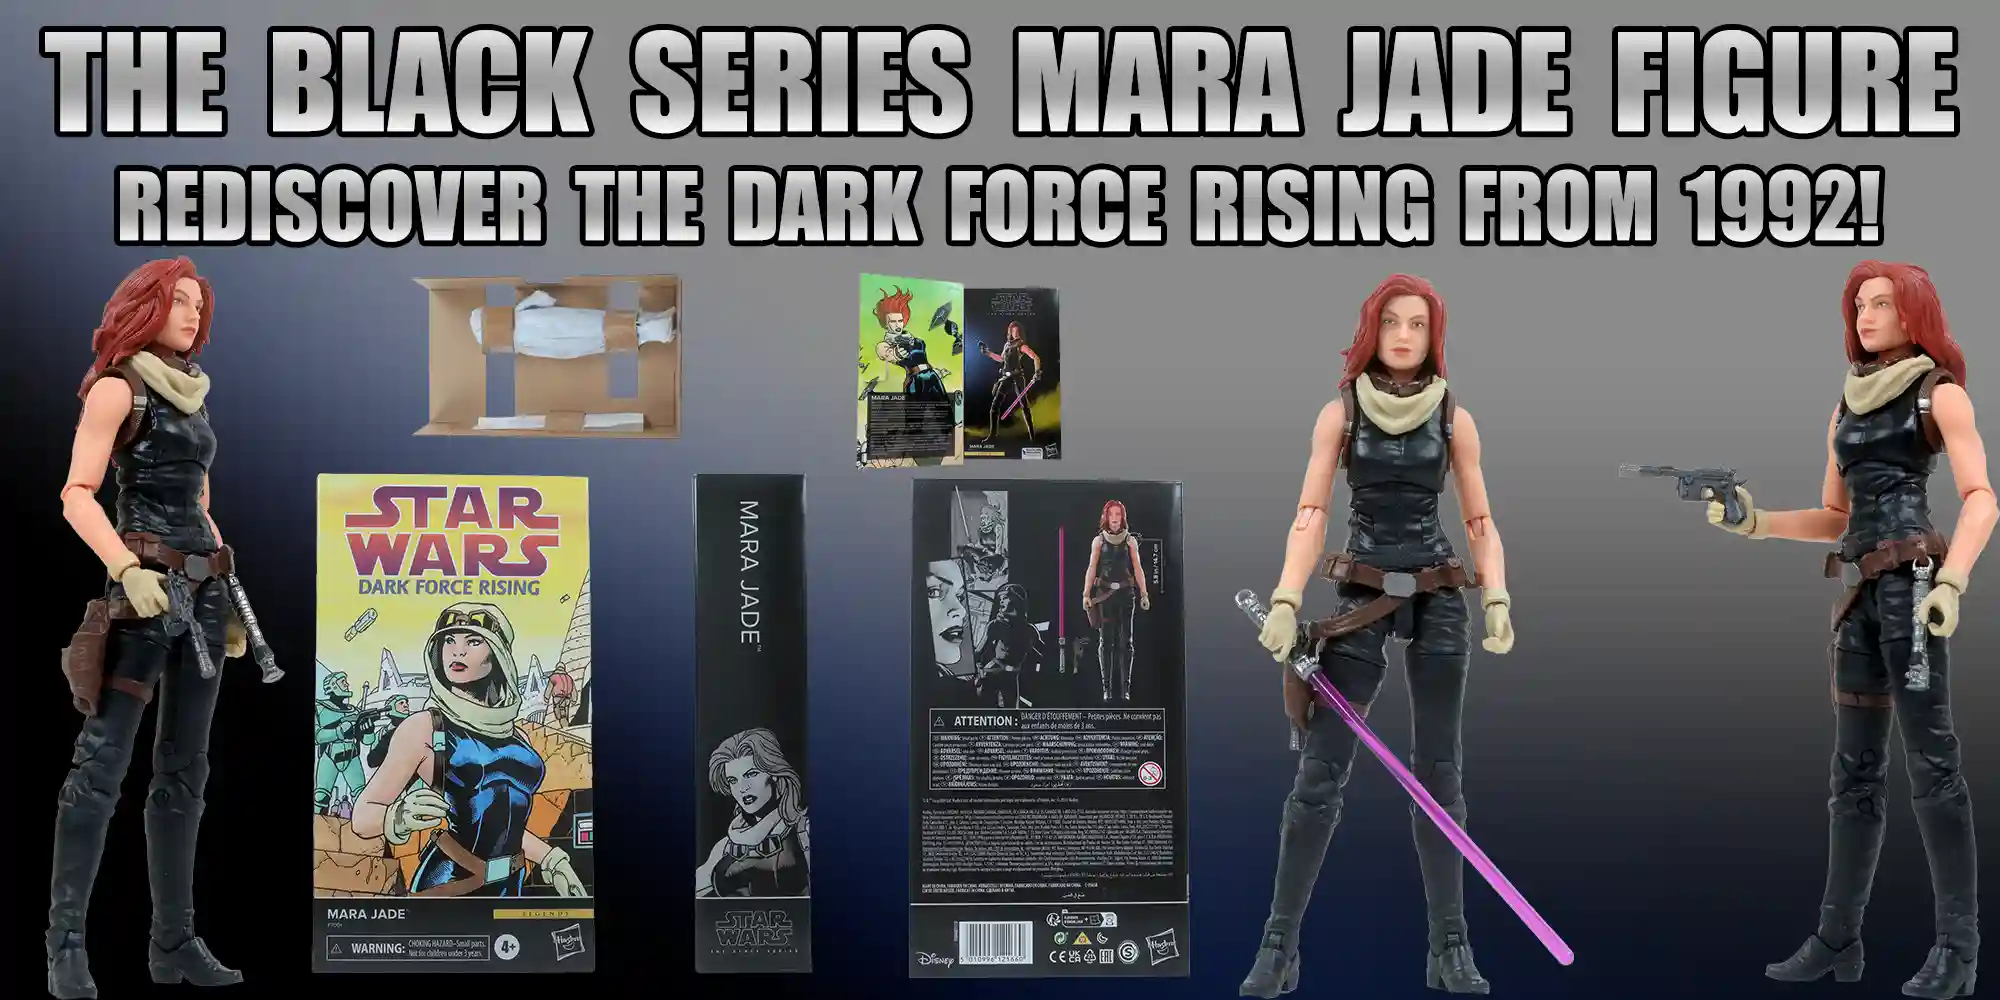 Rediscover The Dark Force Rising With The Black Series Mara Jade Figure!